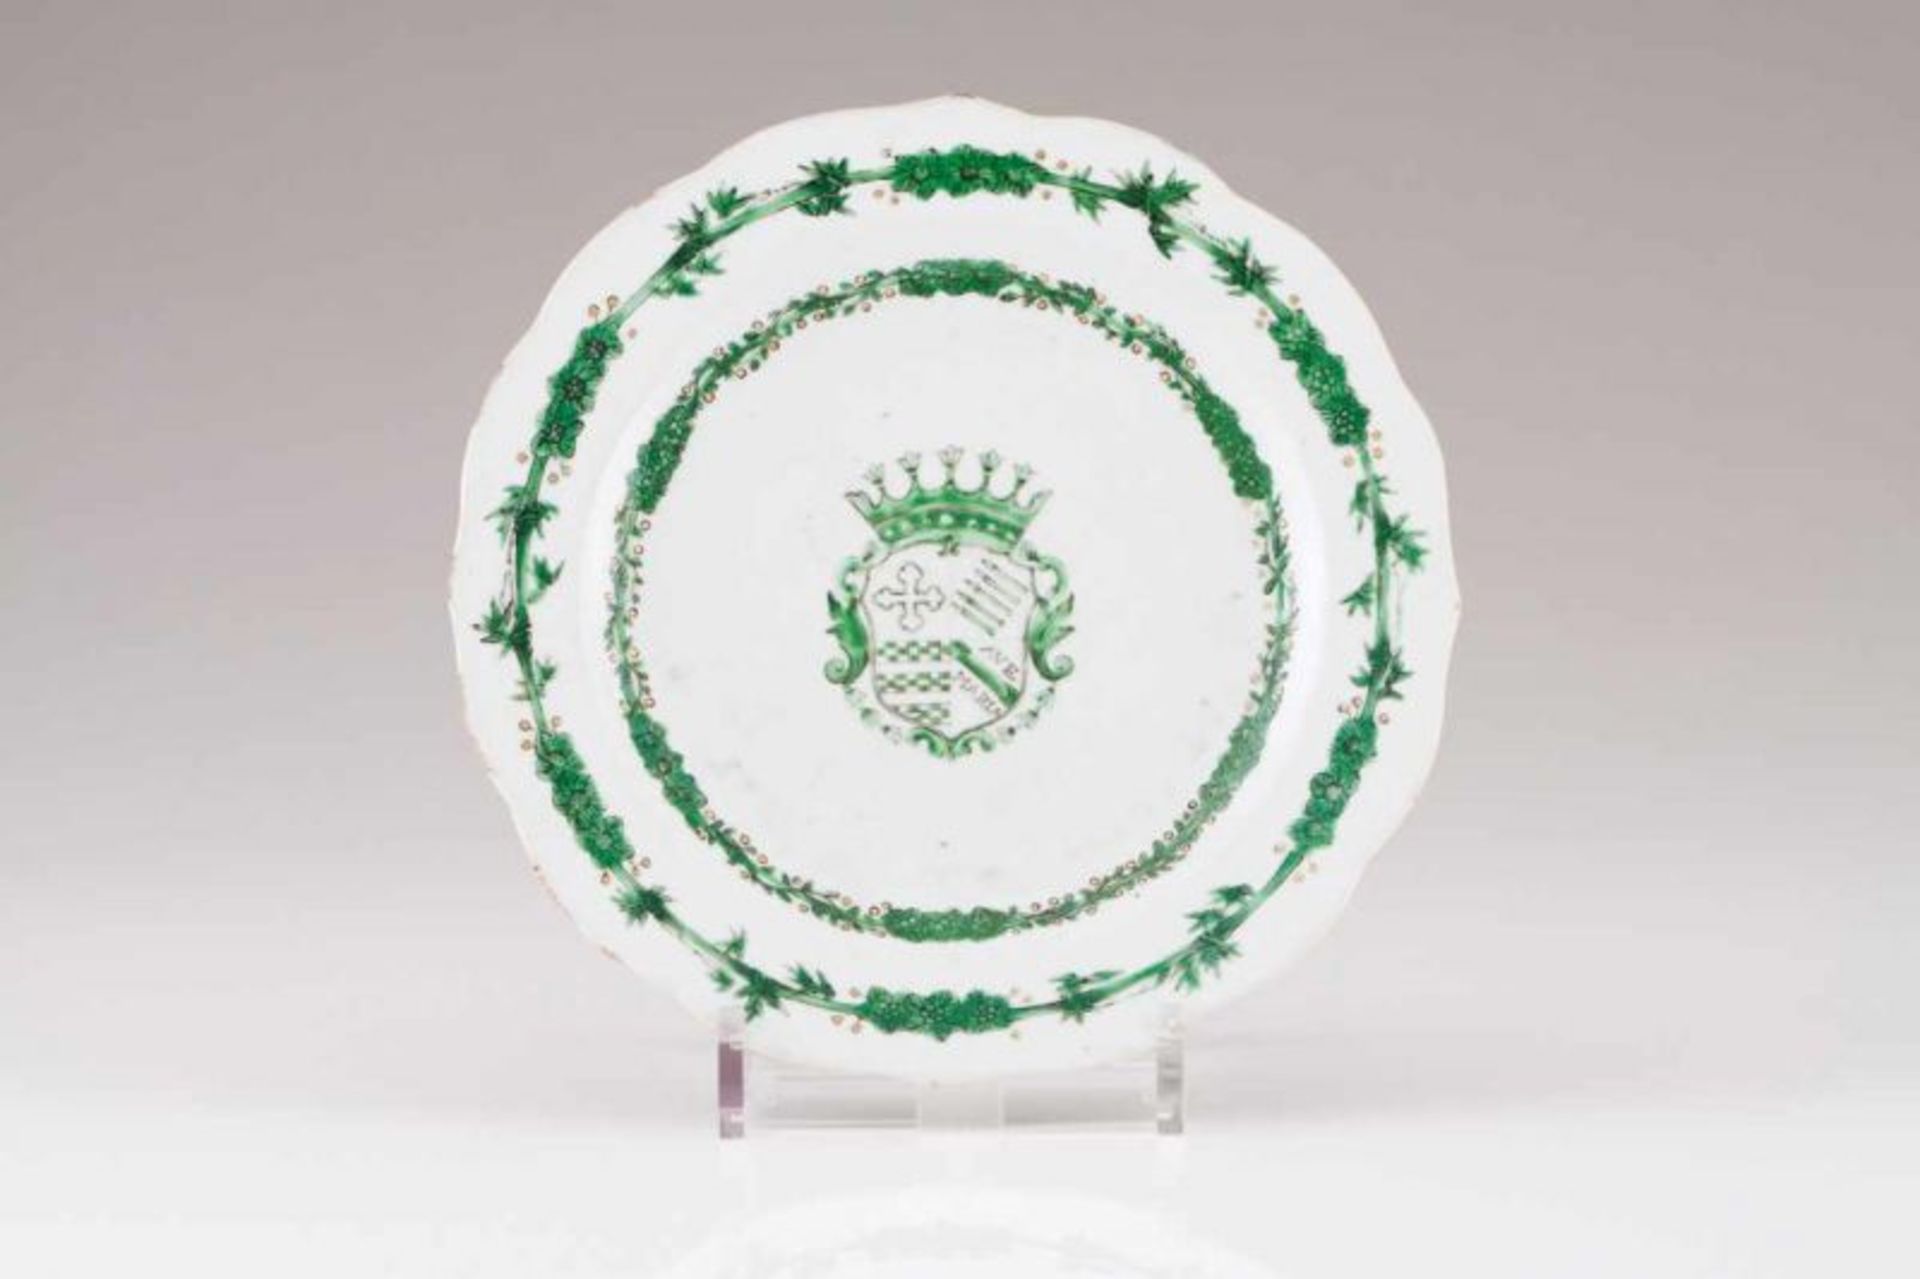 A scalloped plate Chinese export porcelain Gilt and green decoration depicting coat-of-arms of João